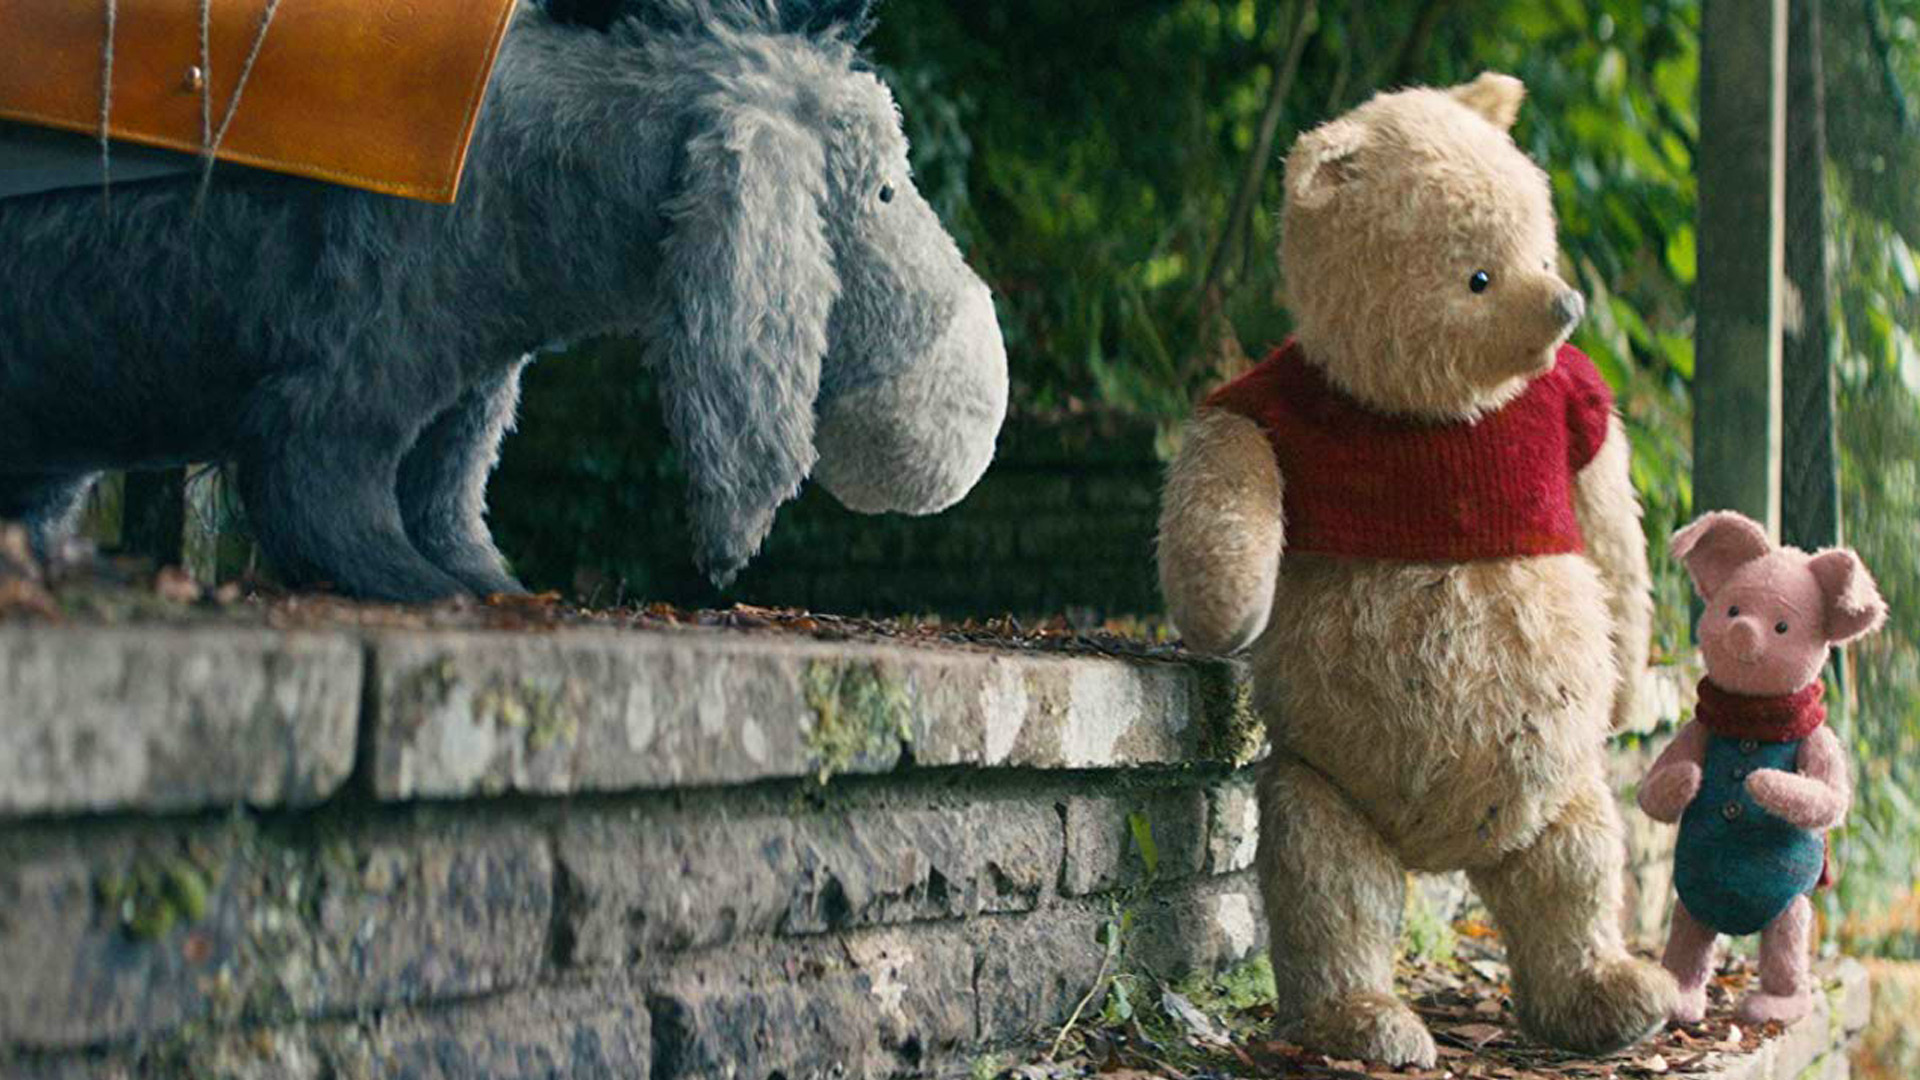 Christopher Robin (Movie): Winnie the Pooh adaptation, Animated characters, Live-action settings. 1920x1080 Full HD Wallpaper.